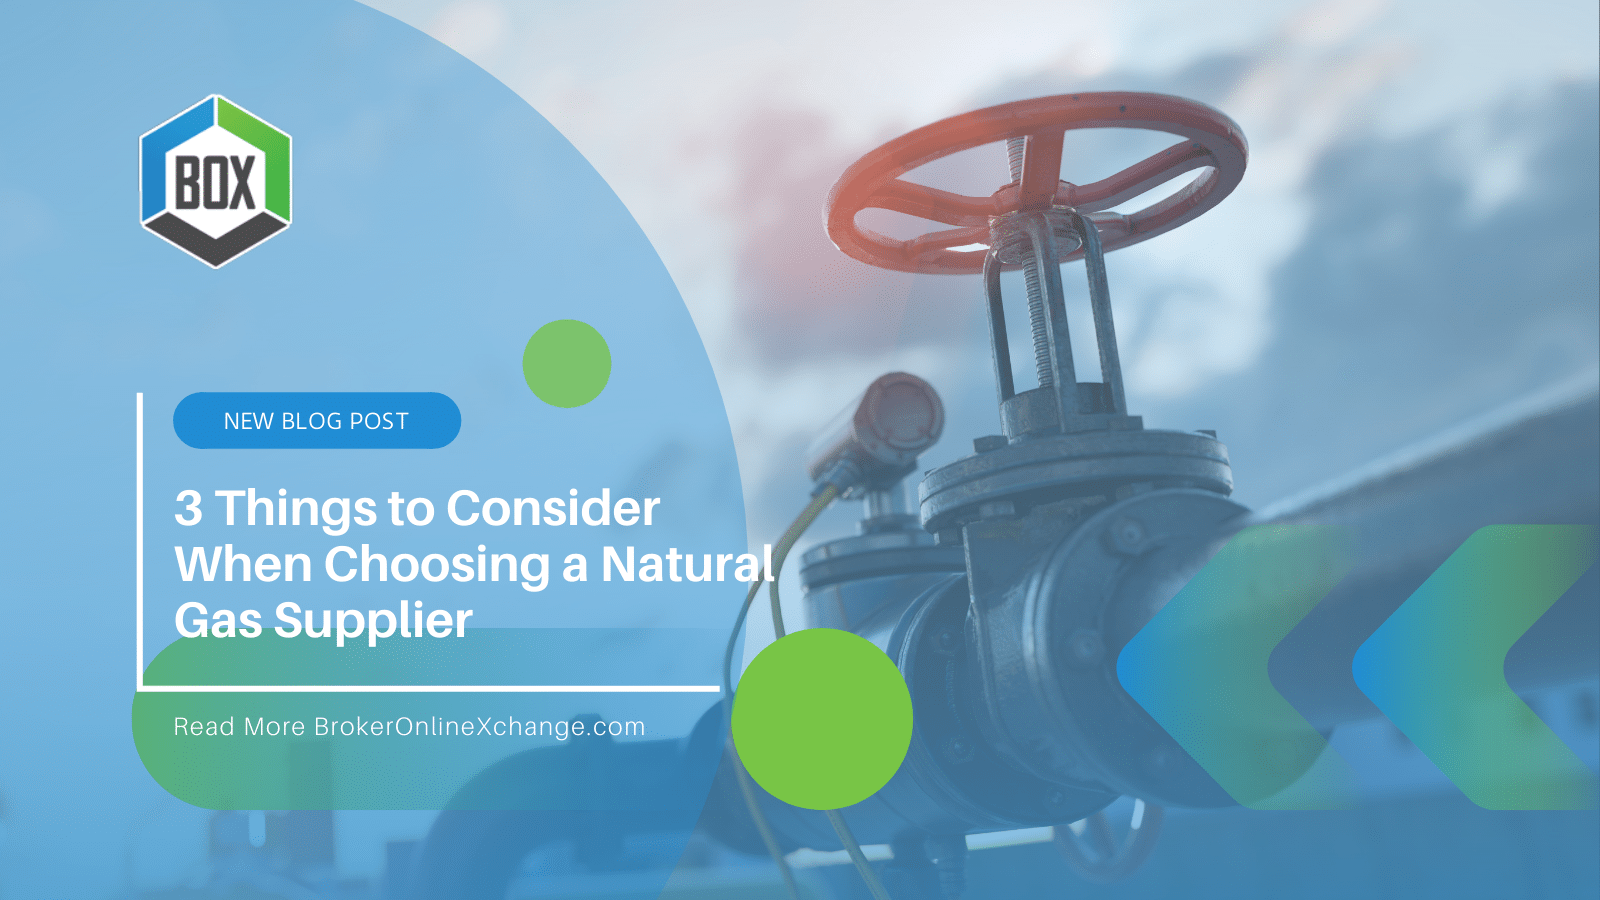 BOX 3 Things to Consider When Choosing a Natural Gas Supplier